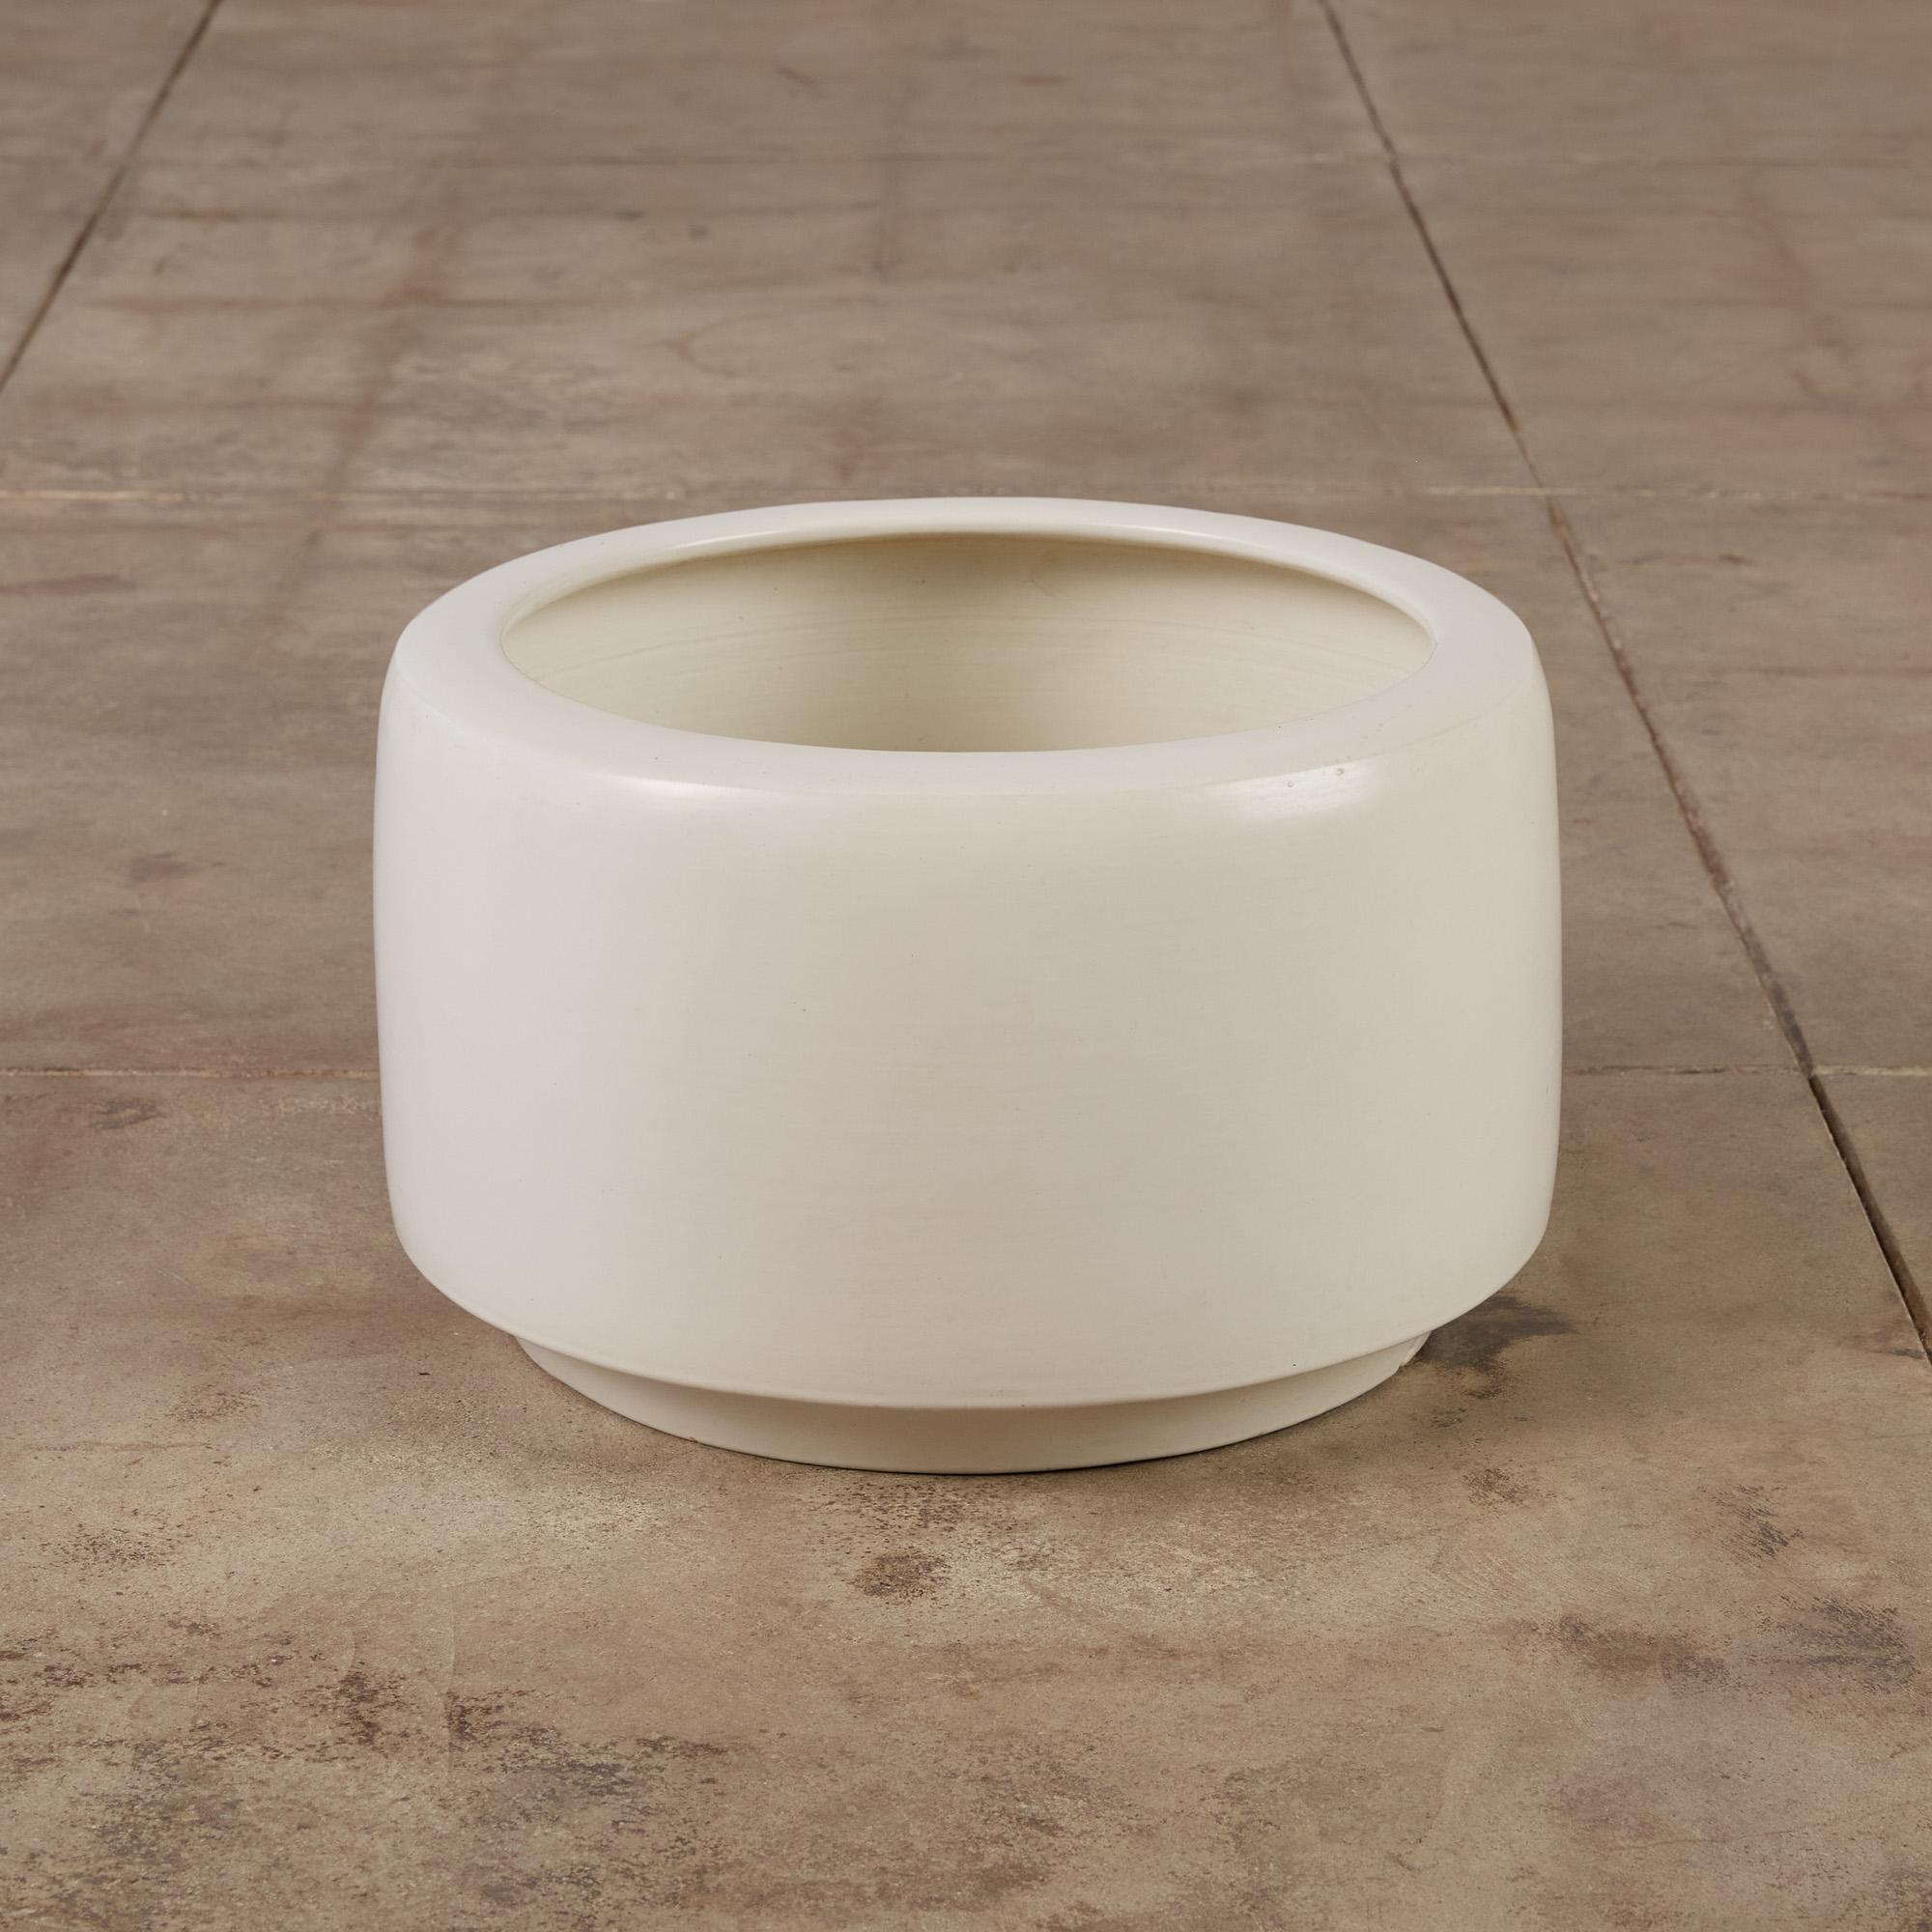 White-Glazed CP-17 Tire Planter by John Follis for Architectural Pottery 4